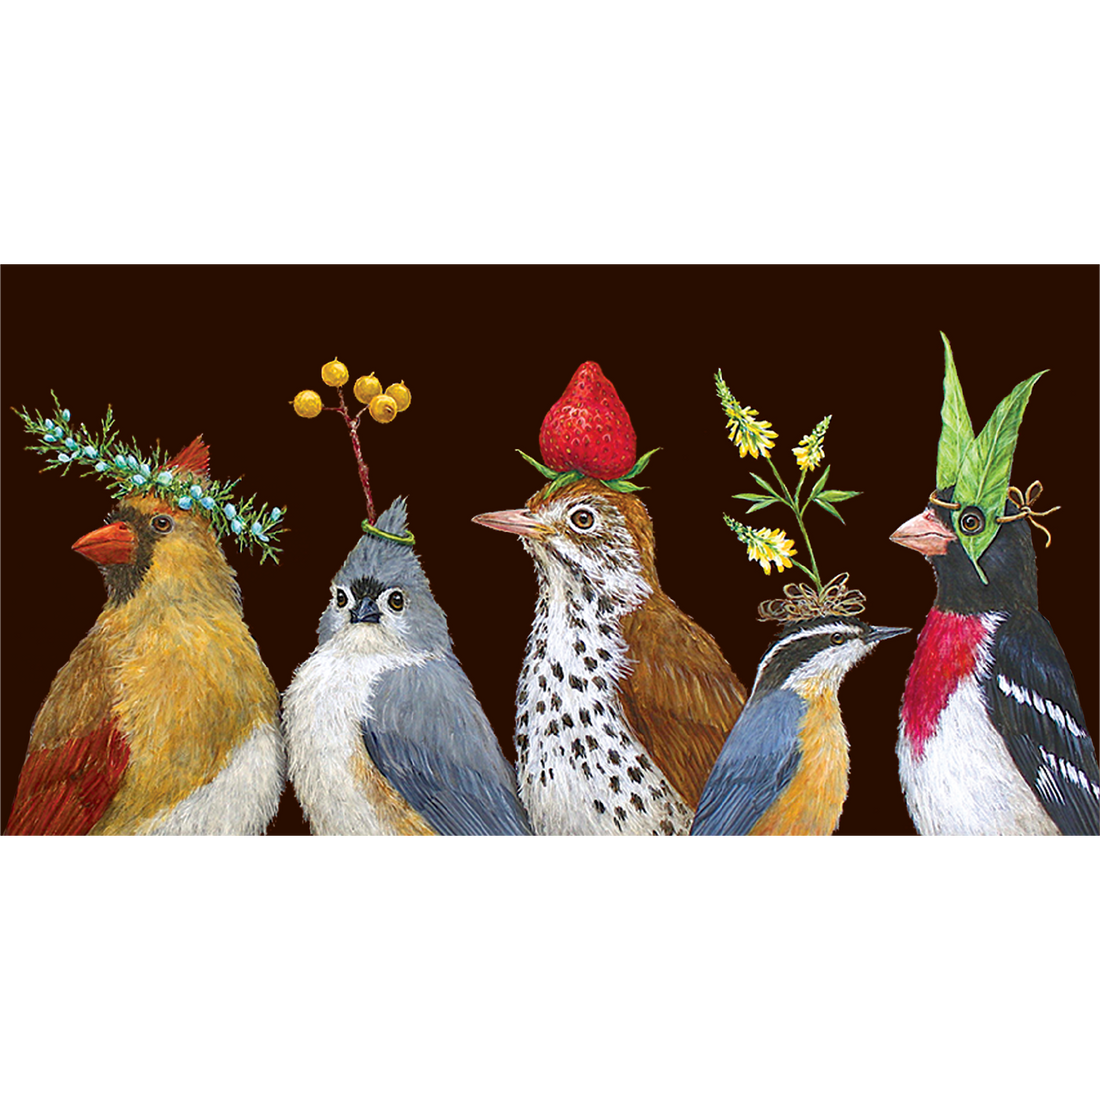 A painting of a group of songbirds with flowers on their heads, inspired by Hester &amp; Cook&